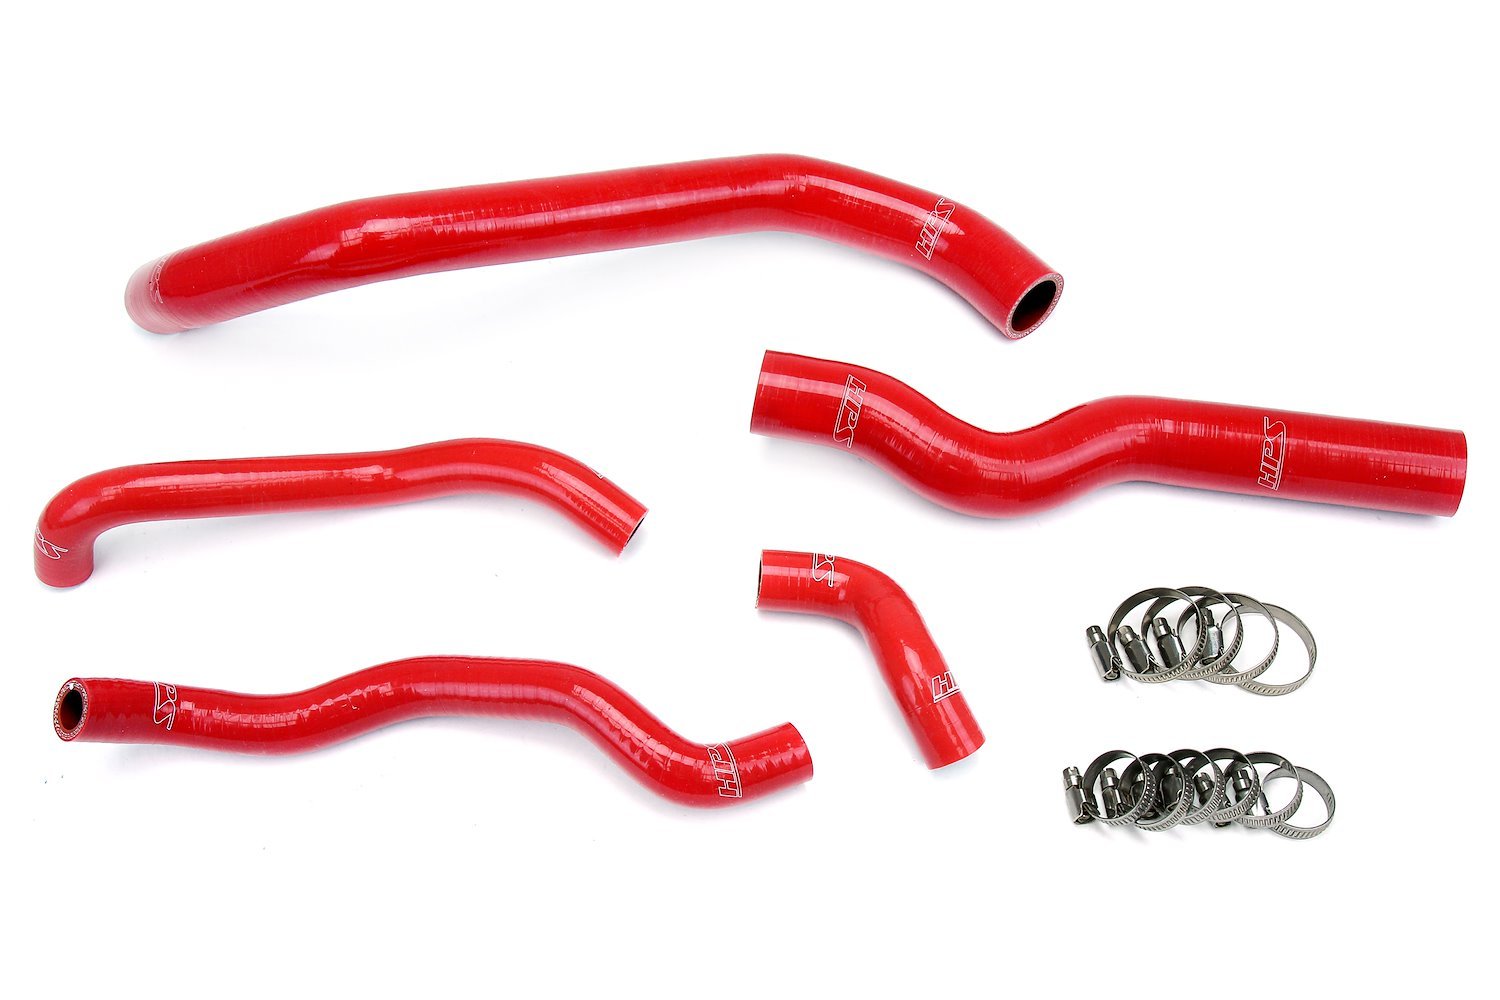 57-1973-RED Radiator and Heater Hose Kit, 3-Ply Reinforced Silicone, Replaces Rubber Radiator & Heater Coolant Hoses